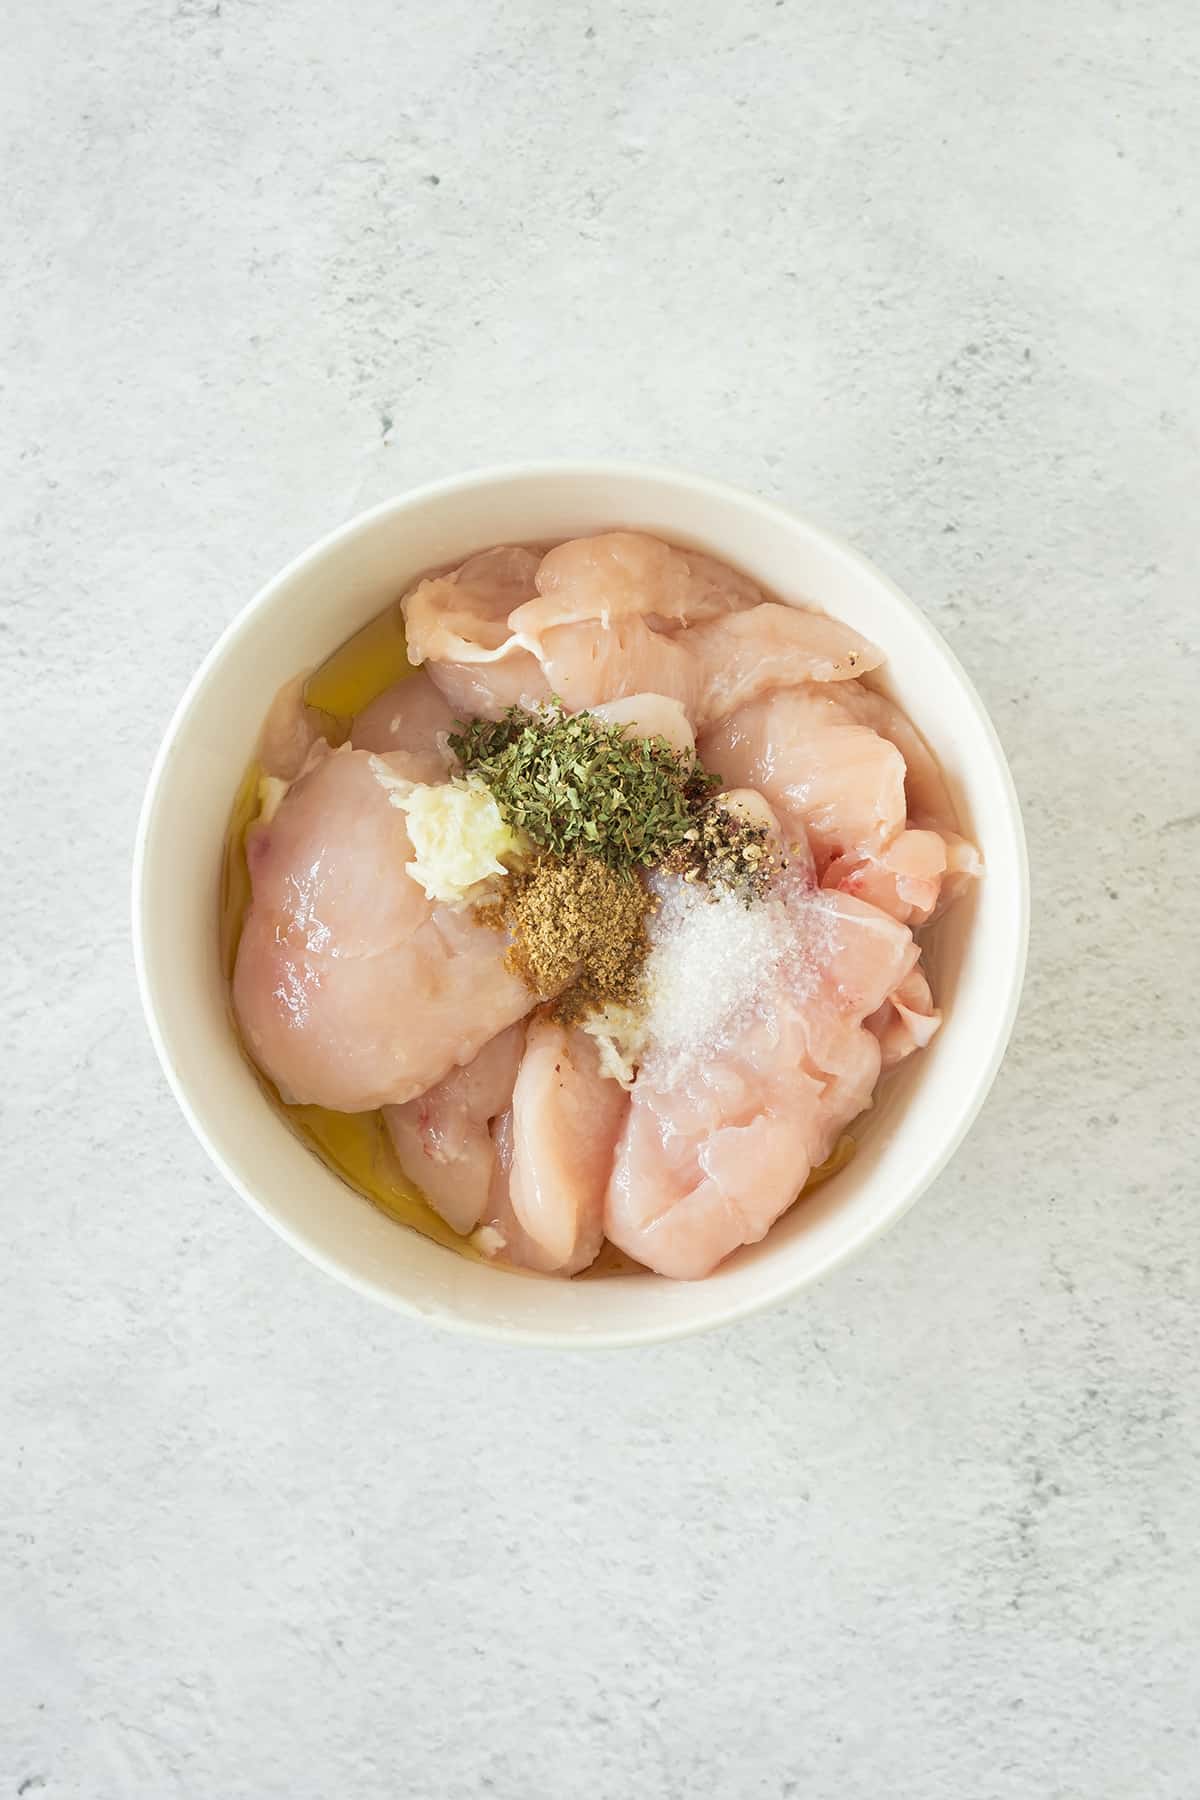 Raw chicken marinating in a white bowl with spices.